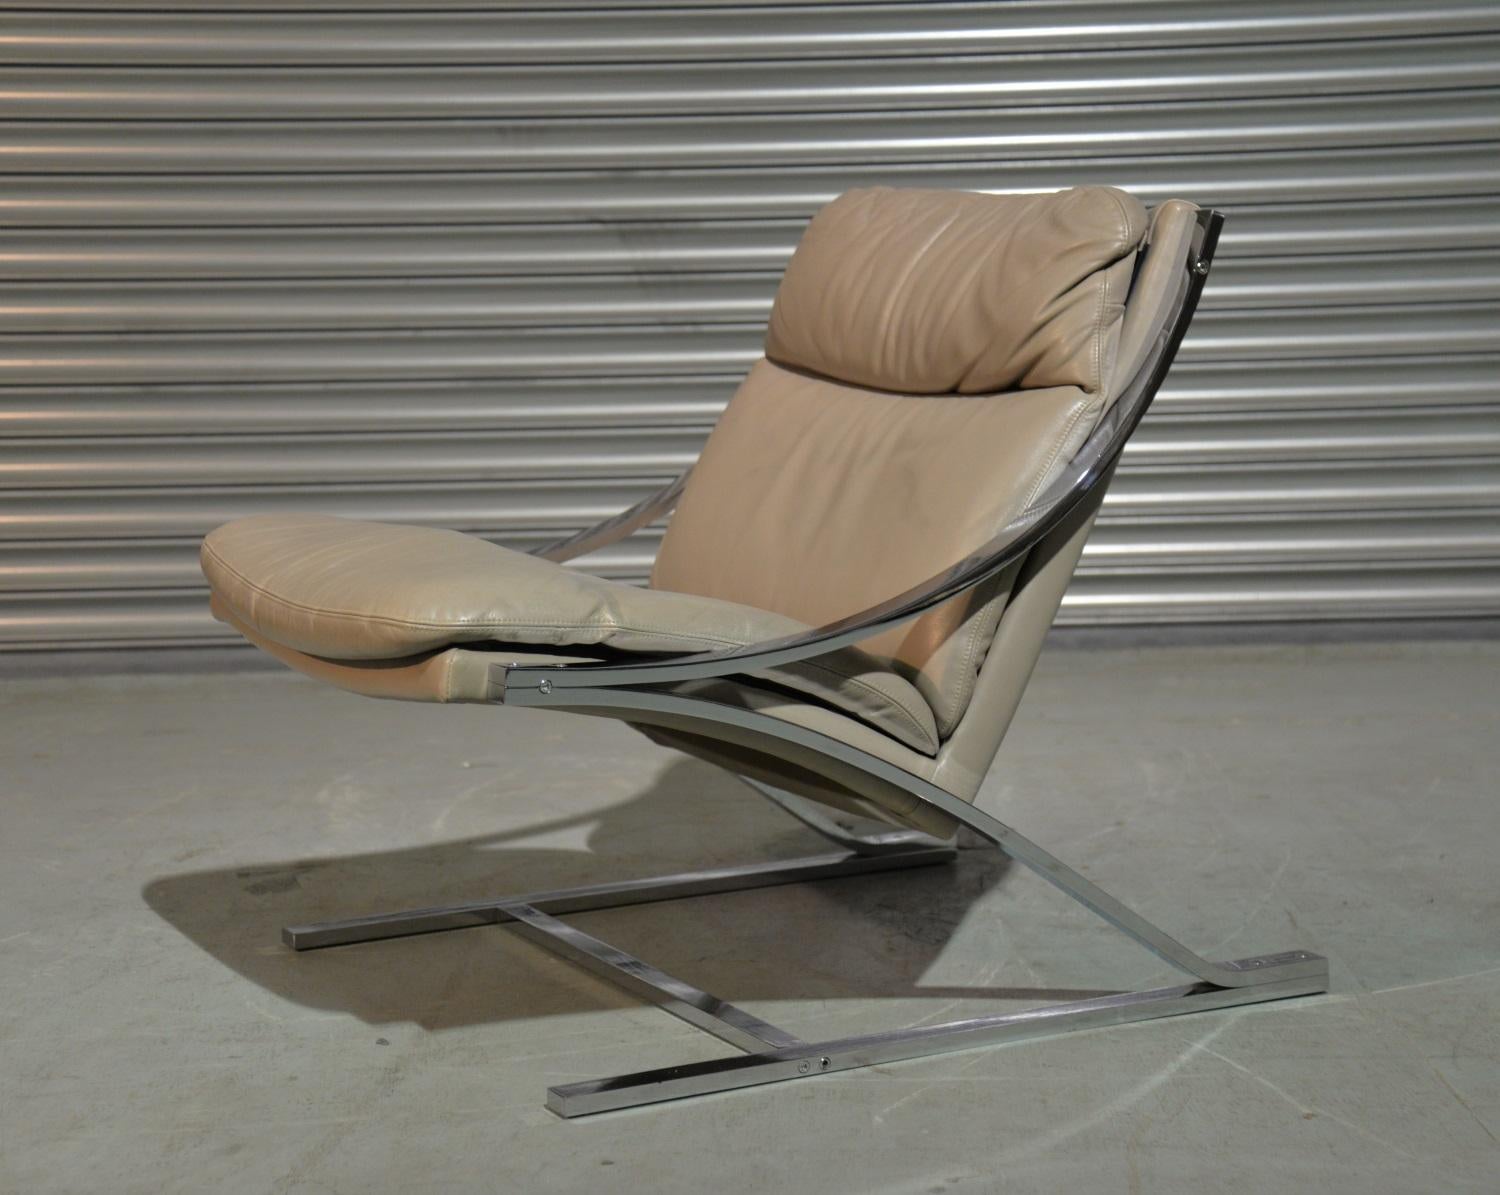 We are delighted to offer you an iconic  'Zeta' armchair by designer Paul Tuttle for Strassle International of Switzerland. The name 'Zeta' originated from the 'Z' shaped chrome base. Hand built to an incredibly high standard, with a chrome-plated